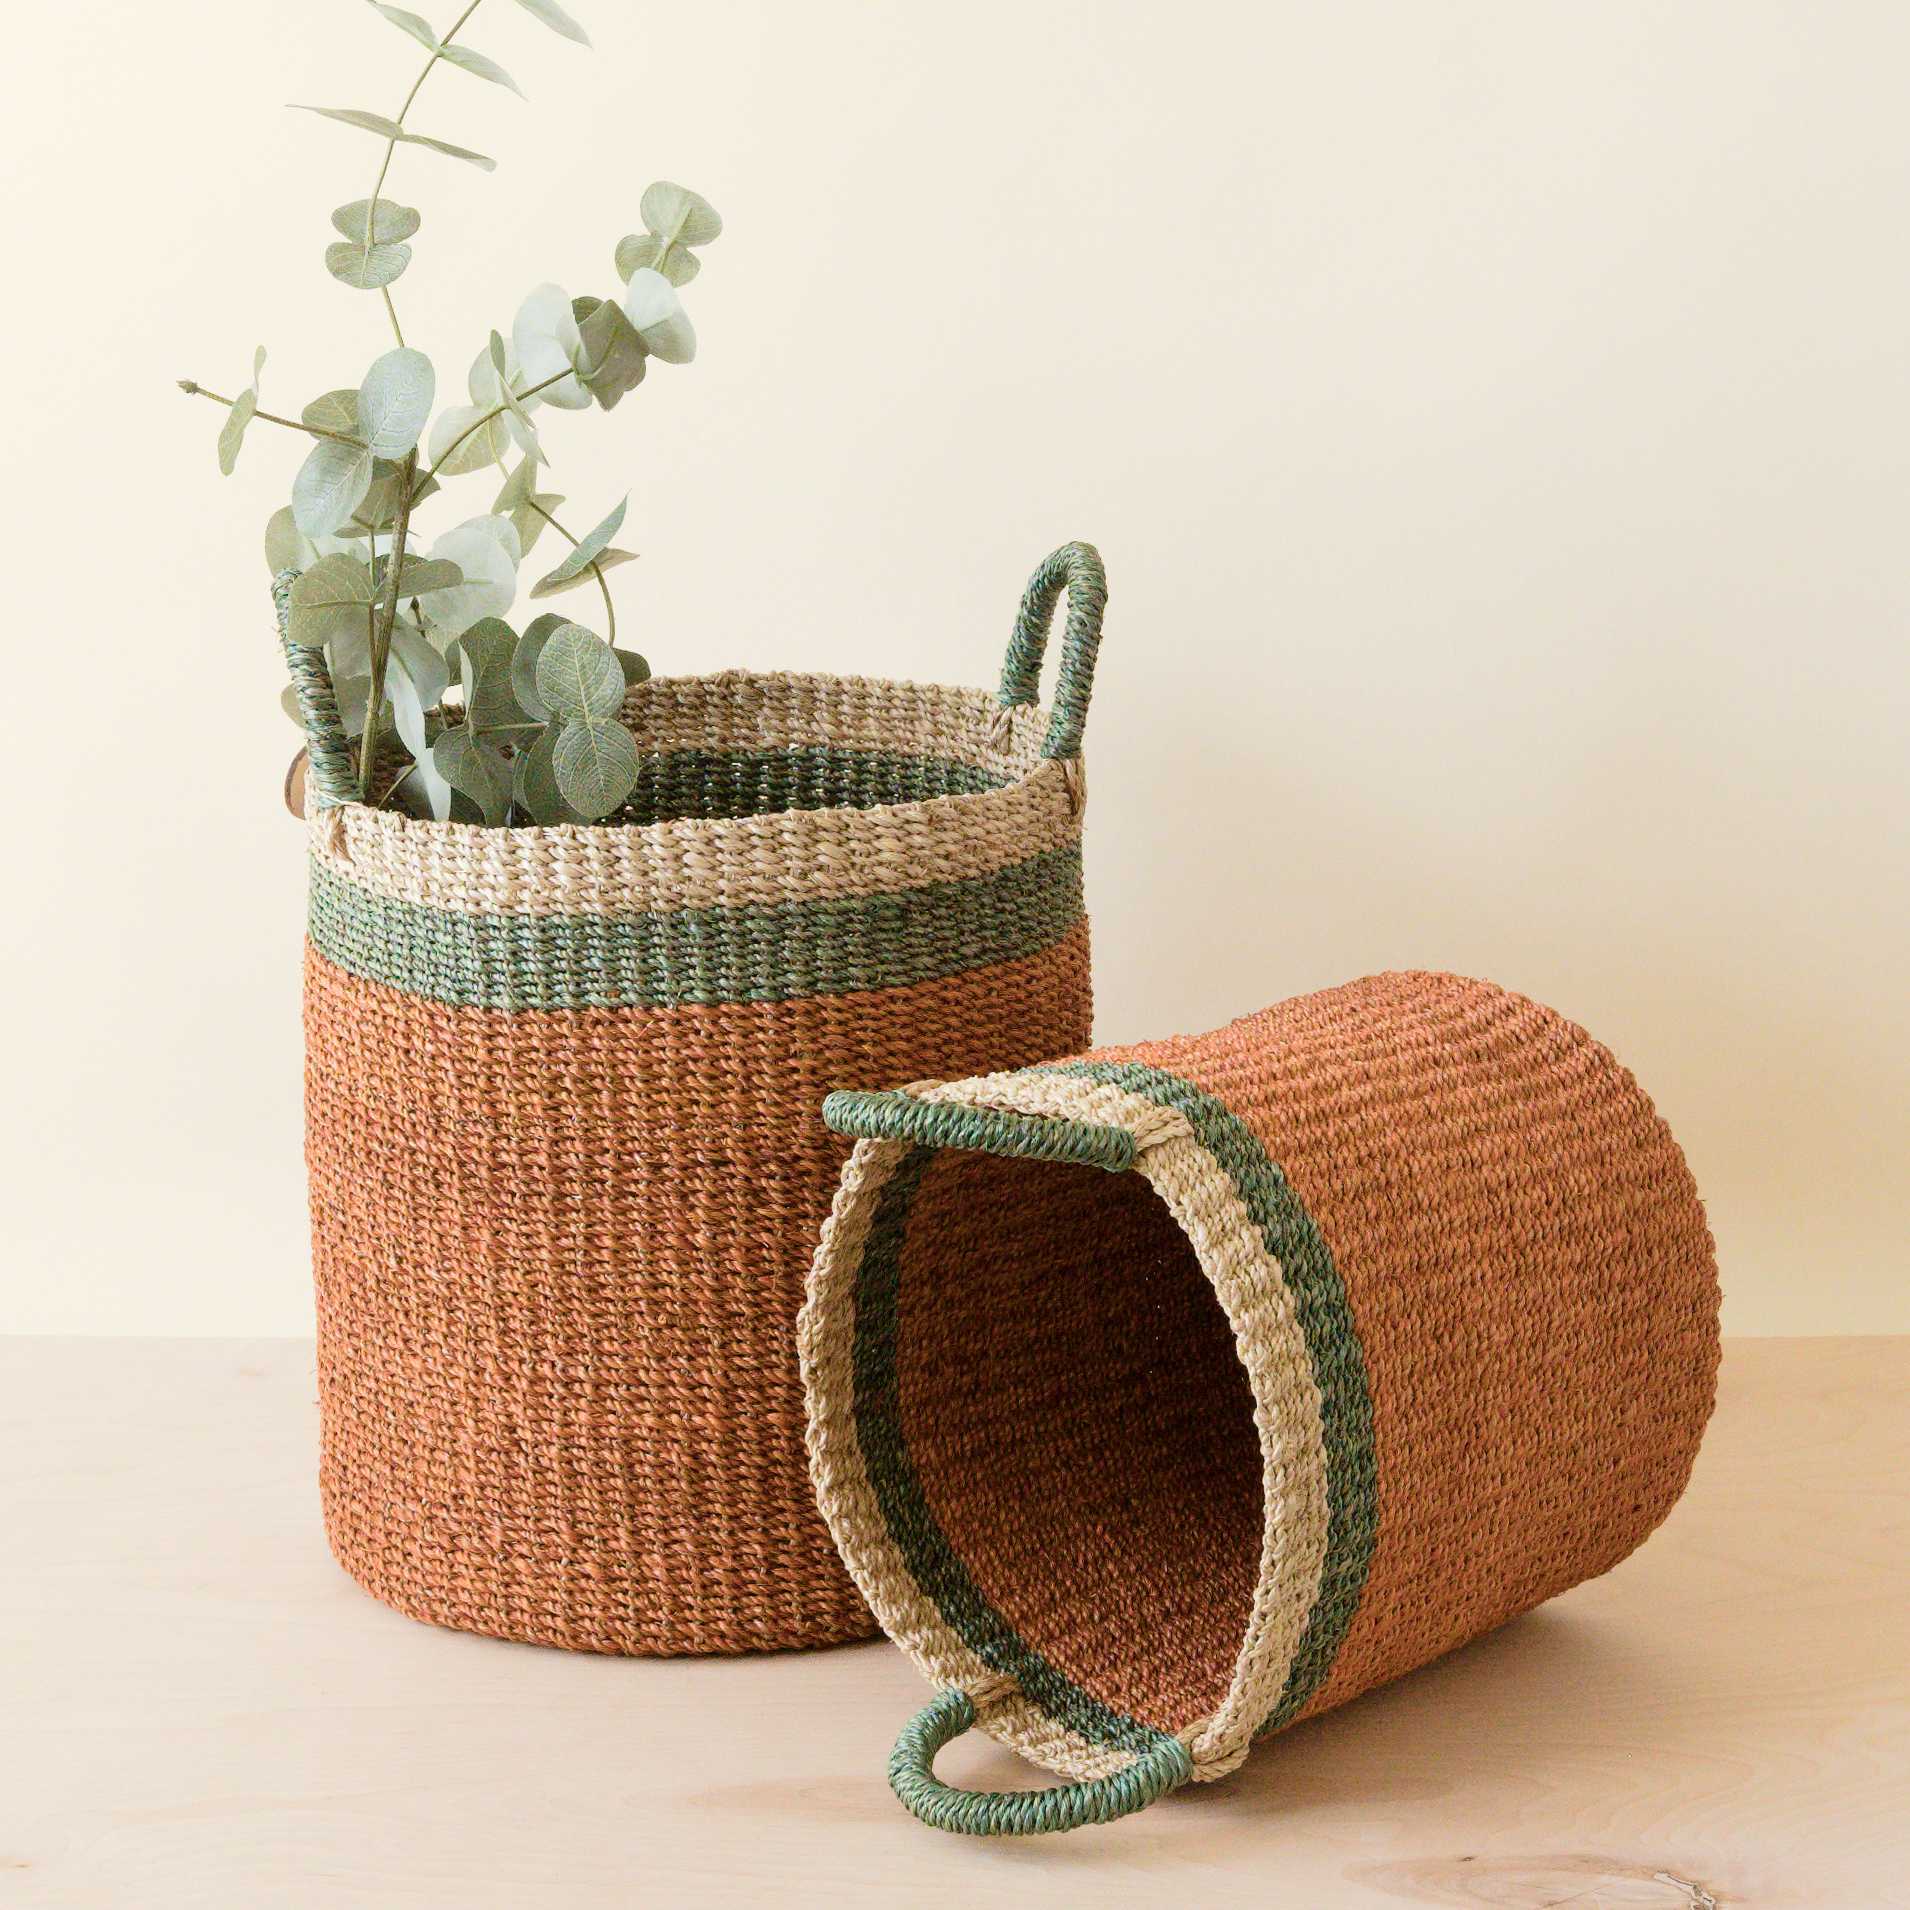 Coral Baskets with Handle, set of 2